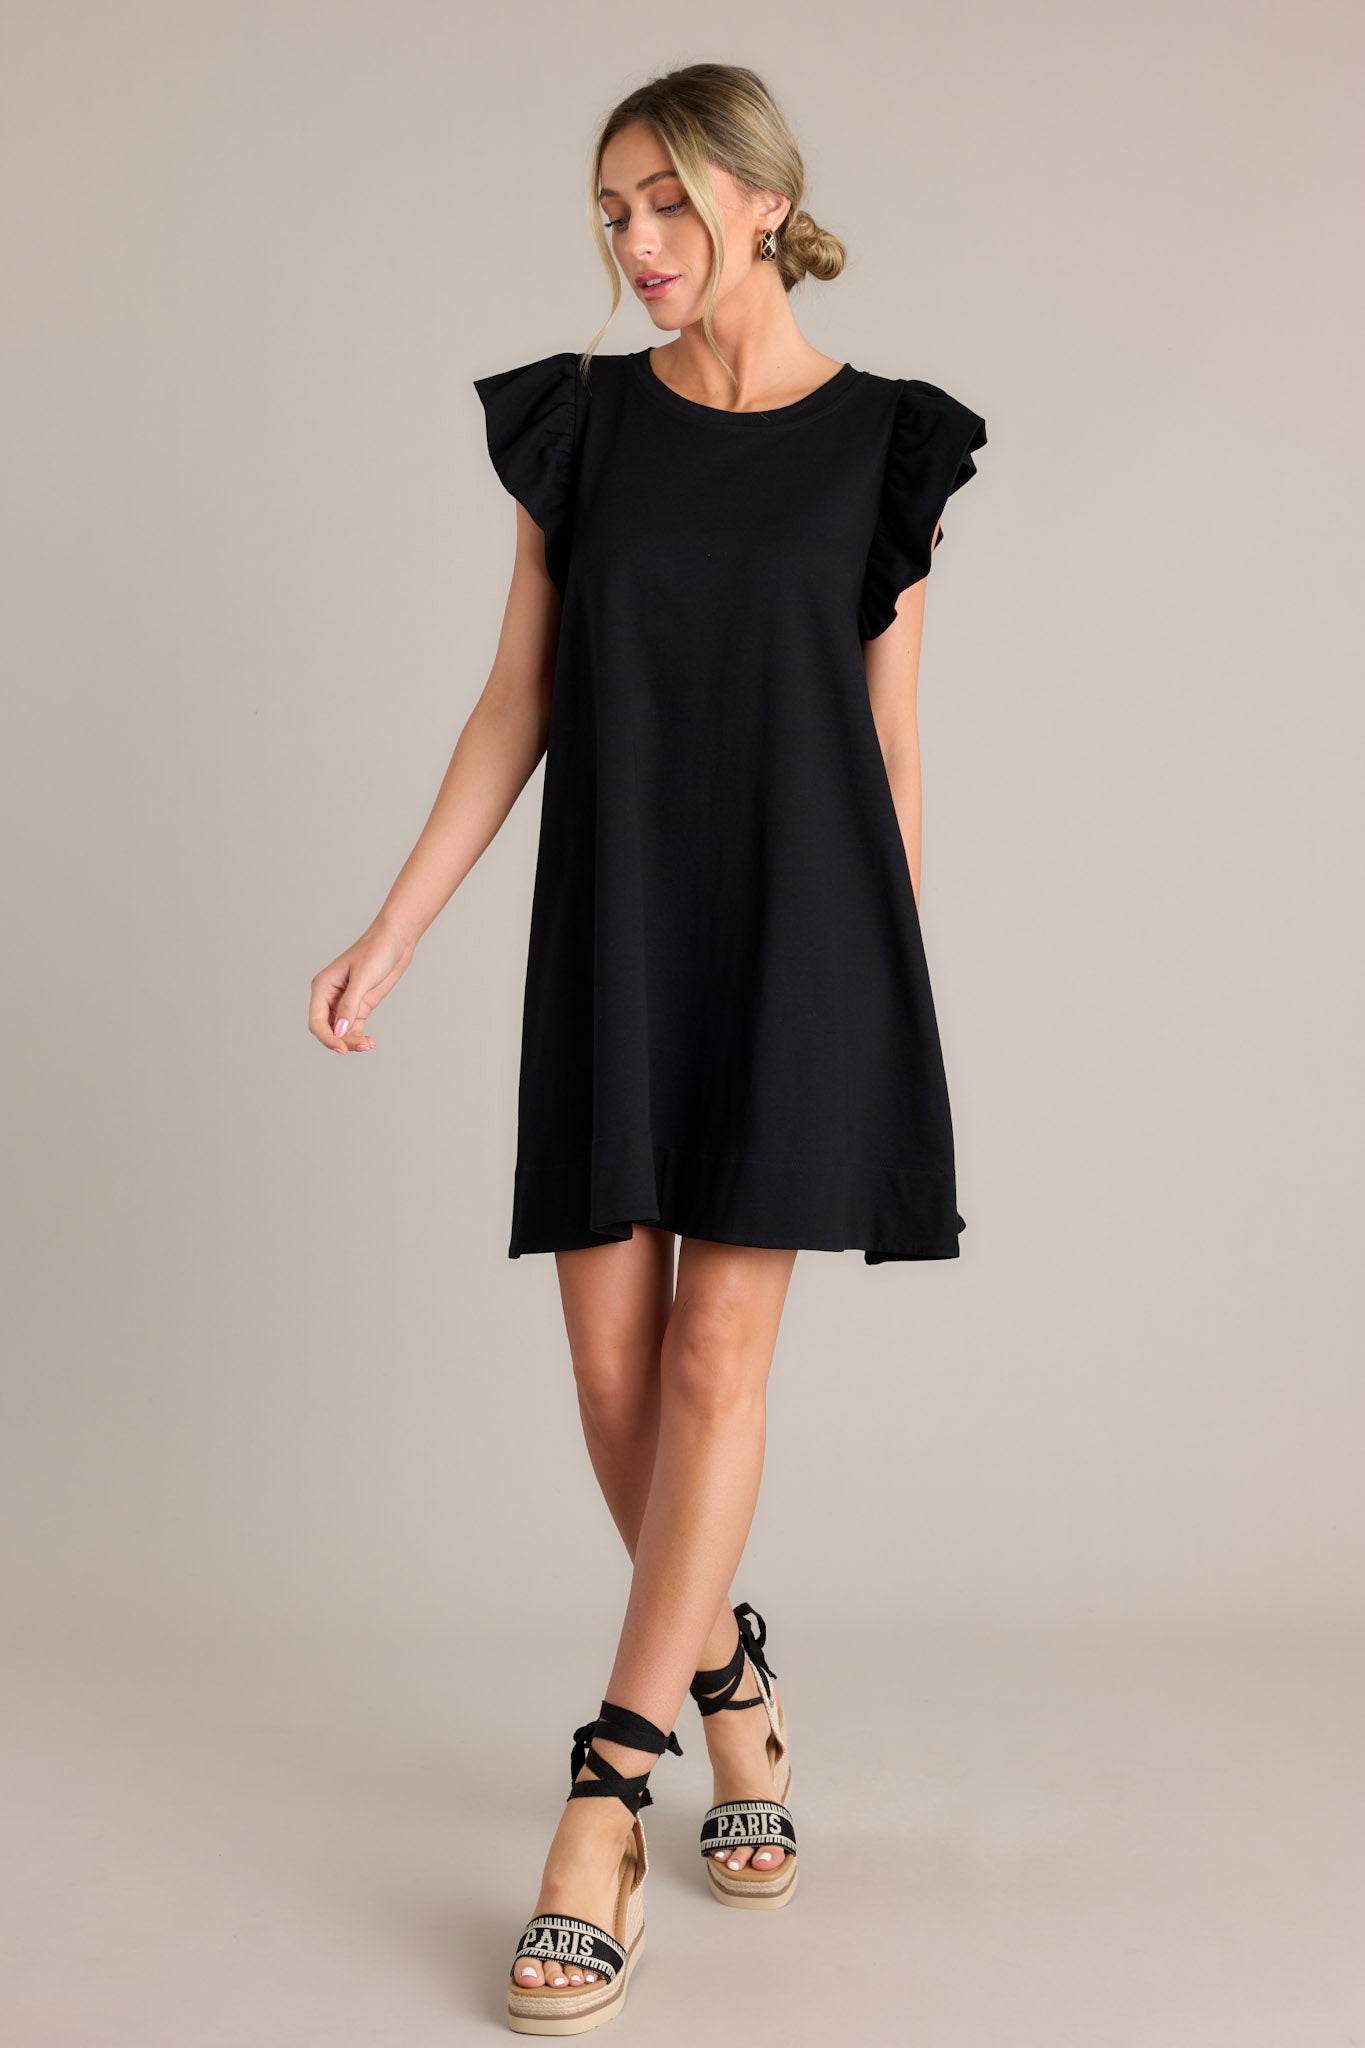 Full length view of a black mini dress with a crew neckline, self-tie drawstring waist feature in the back, functional hip pockets, and ruffled short sleeves